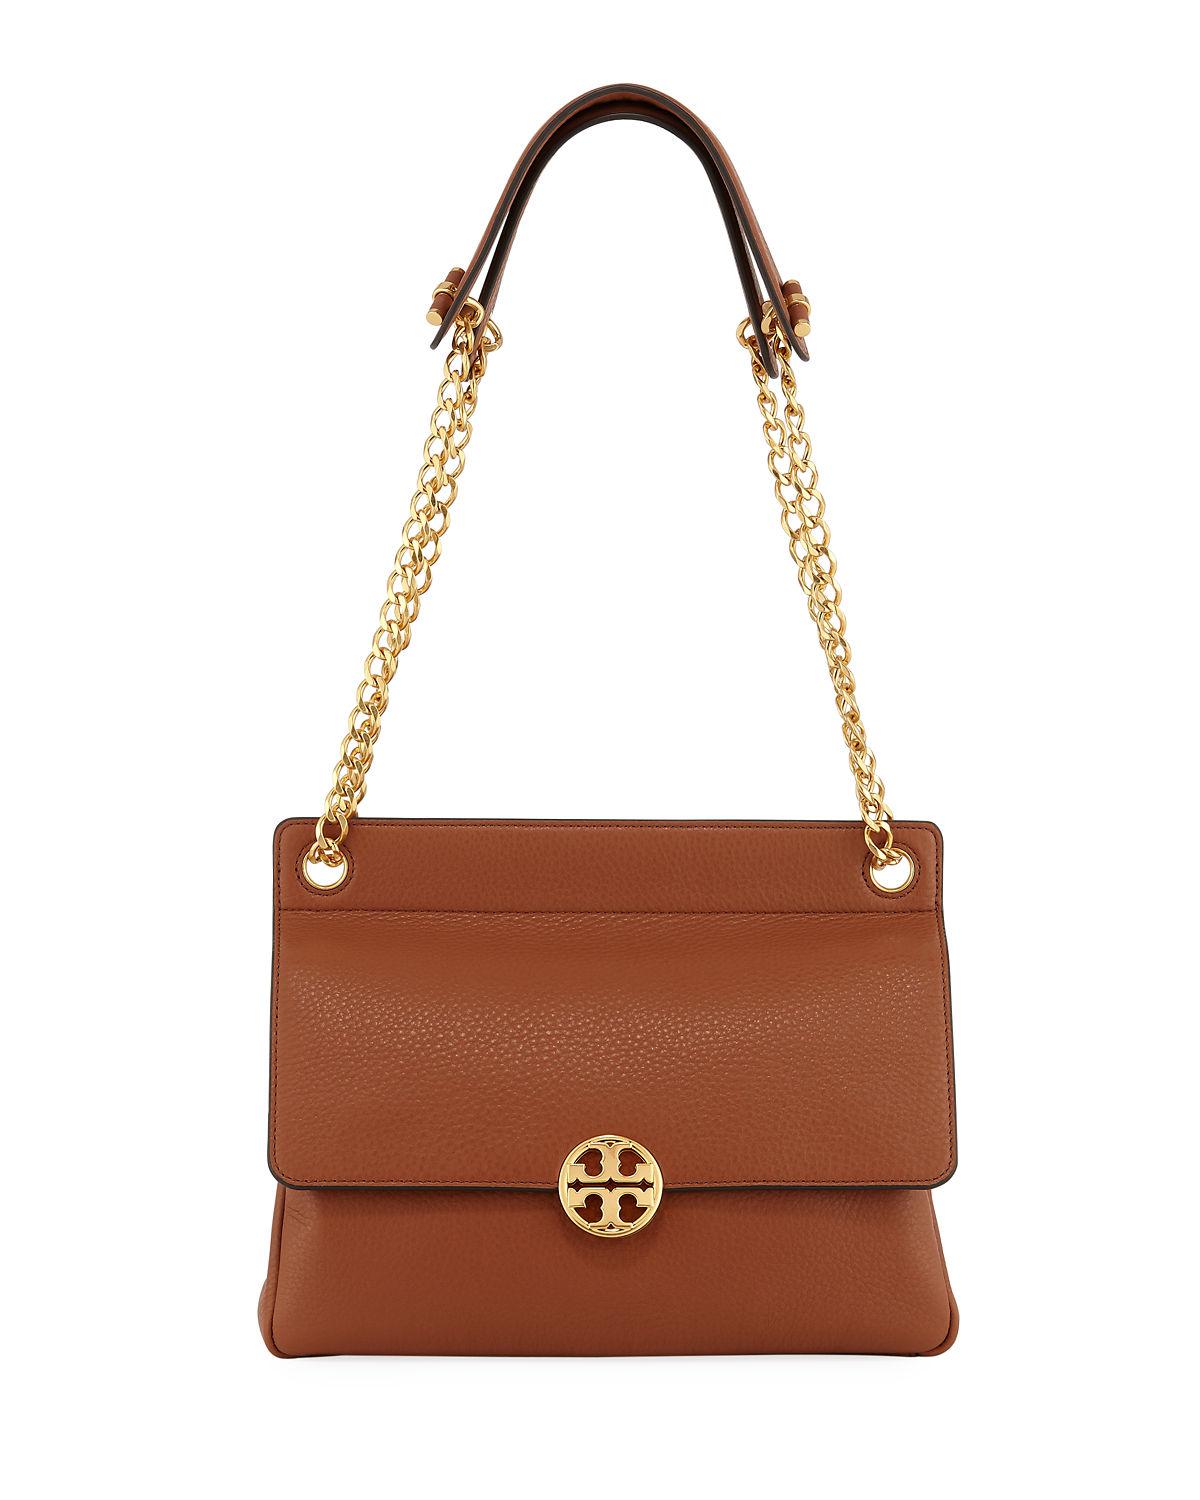 Tory Burch Leather Chelsea Flap Shoulder Bag in Brown - Lyst